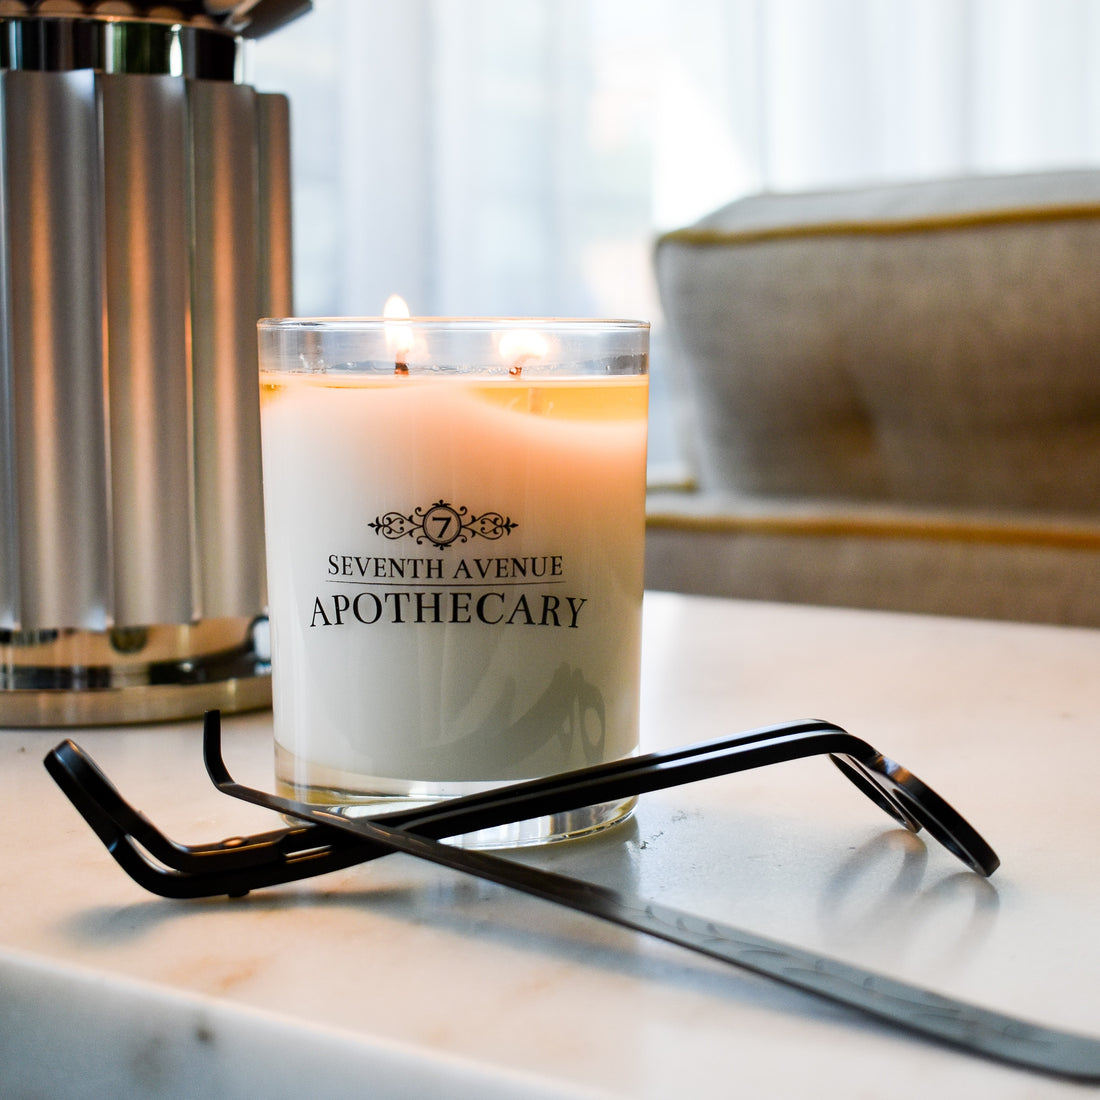 5 Tips To Make the Most of your Candles!